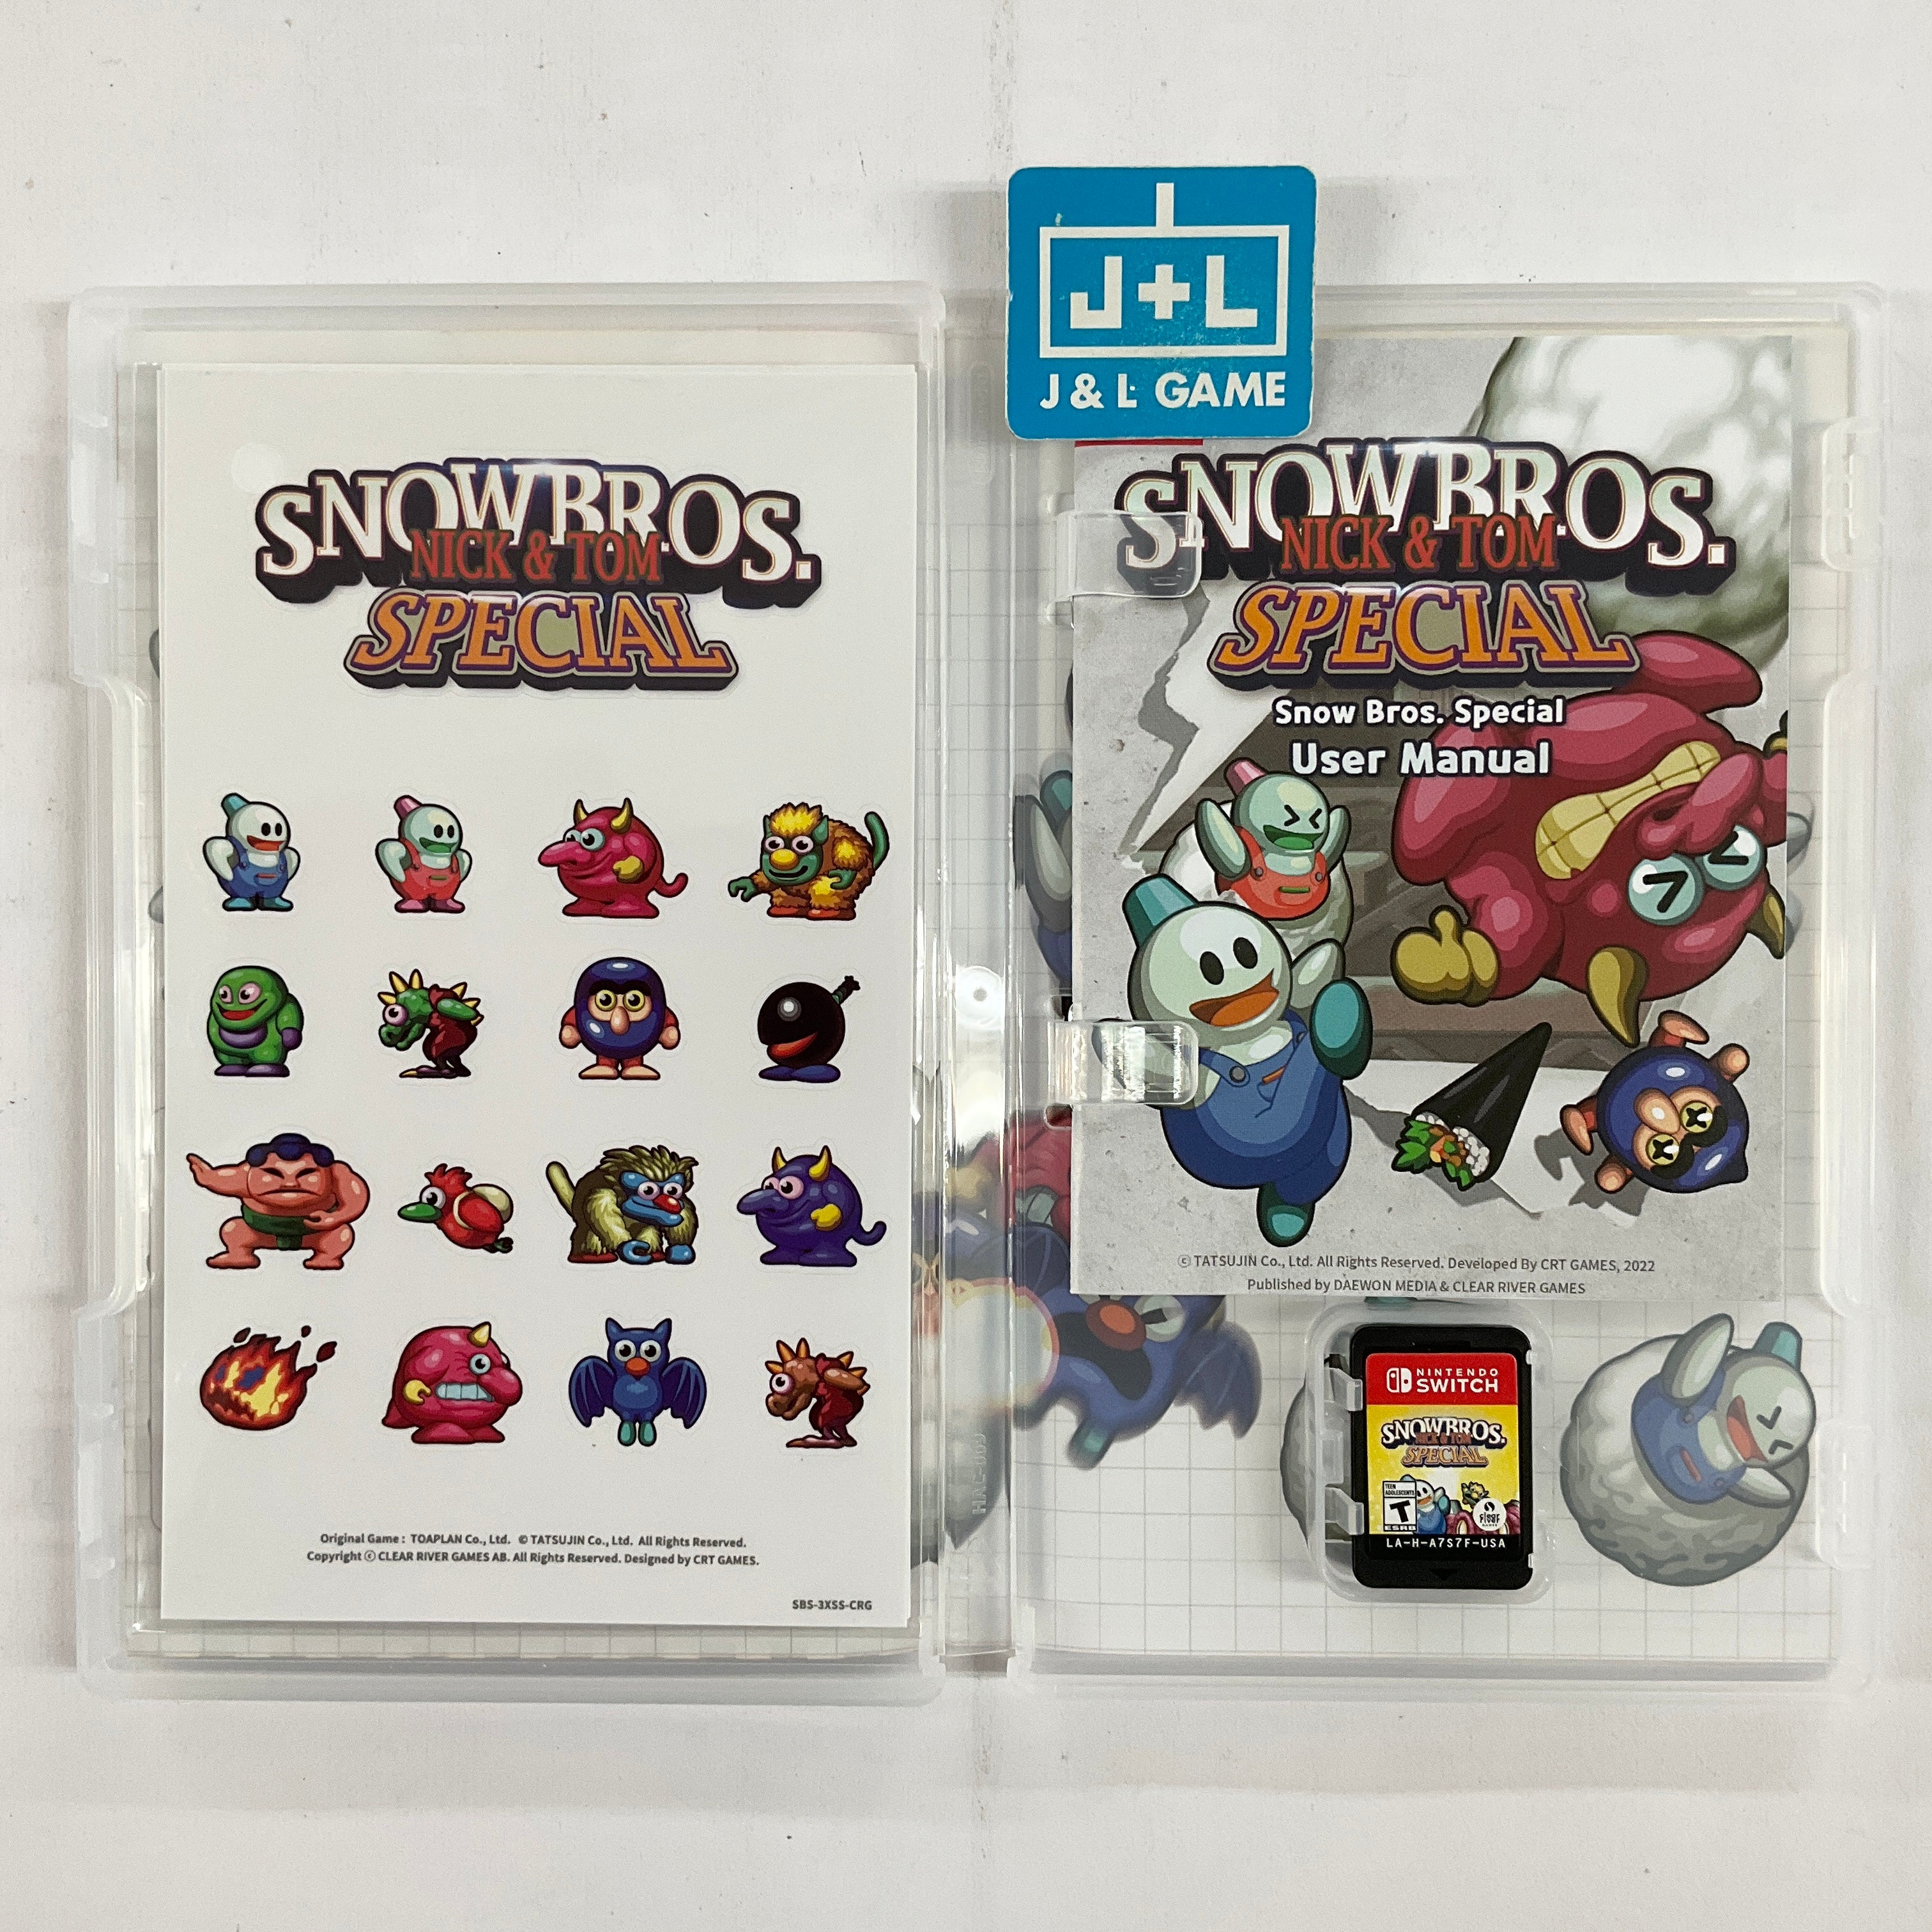 Snow Bros Nick & Tom Special - (NSW) Nintendo Switch [UNBOXING] Video Games Clear River Games   